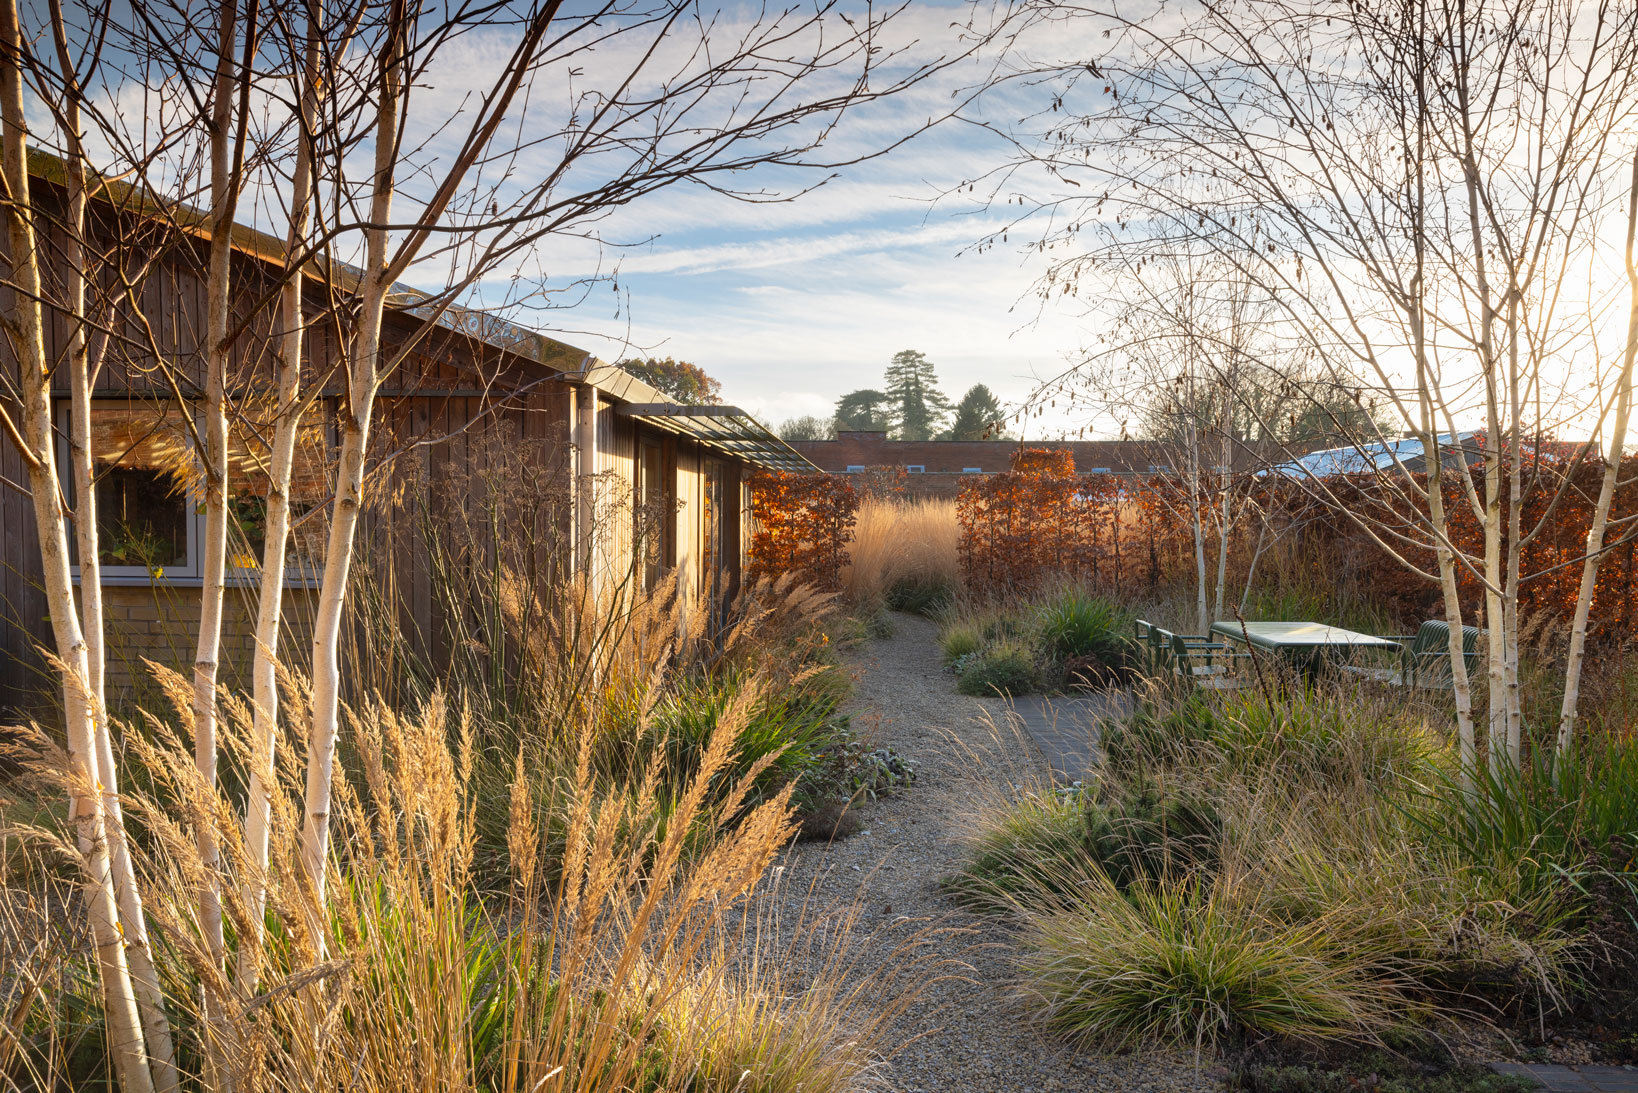 Colm Joseph Suffolk walled garden winter texture colour birch trees multi-stem seating area naturalistic planting timber architecture gravel path beech hedge modern design